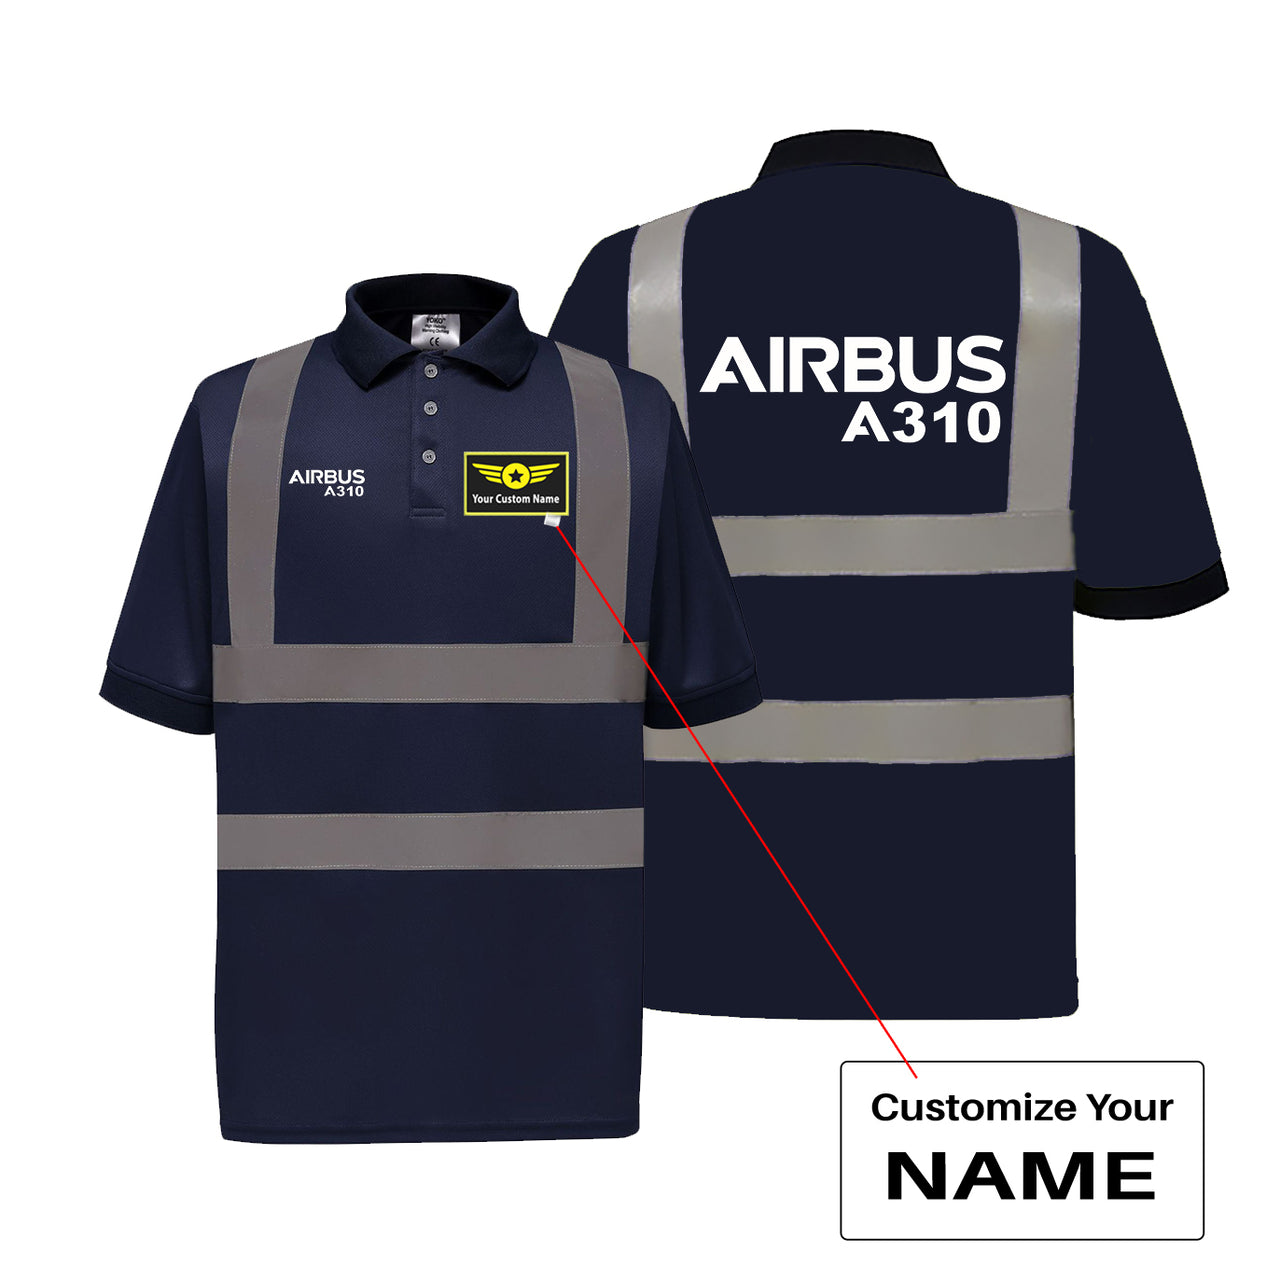 Airbus A310 & Text Designed Reflective Polo T-Shirts